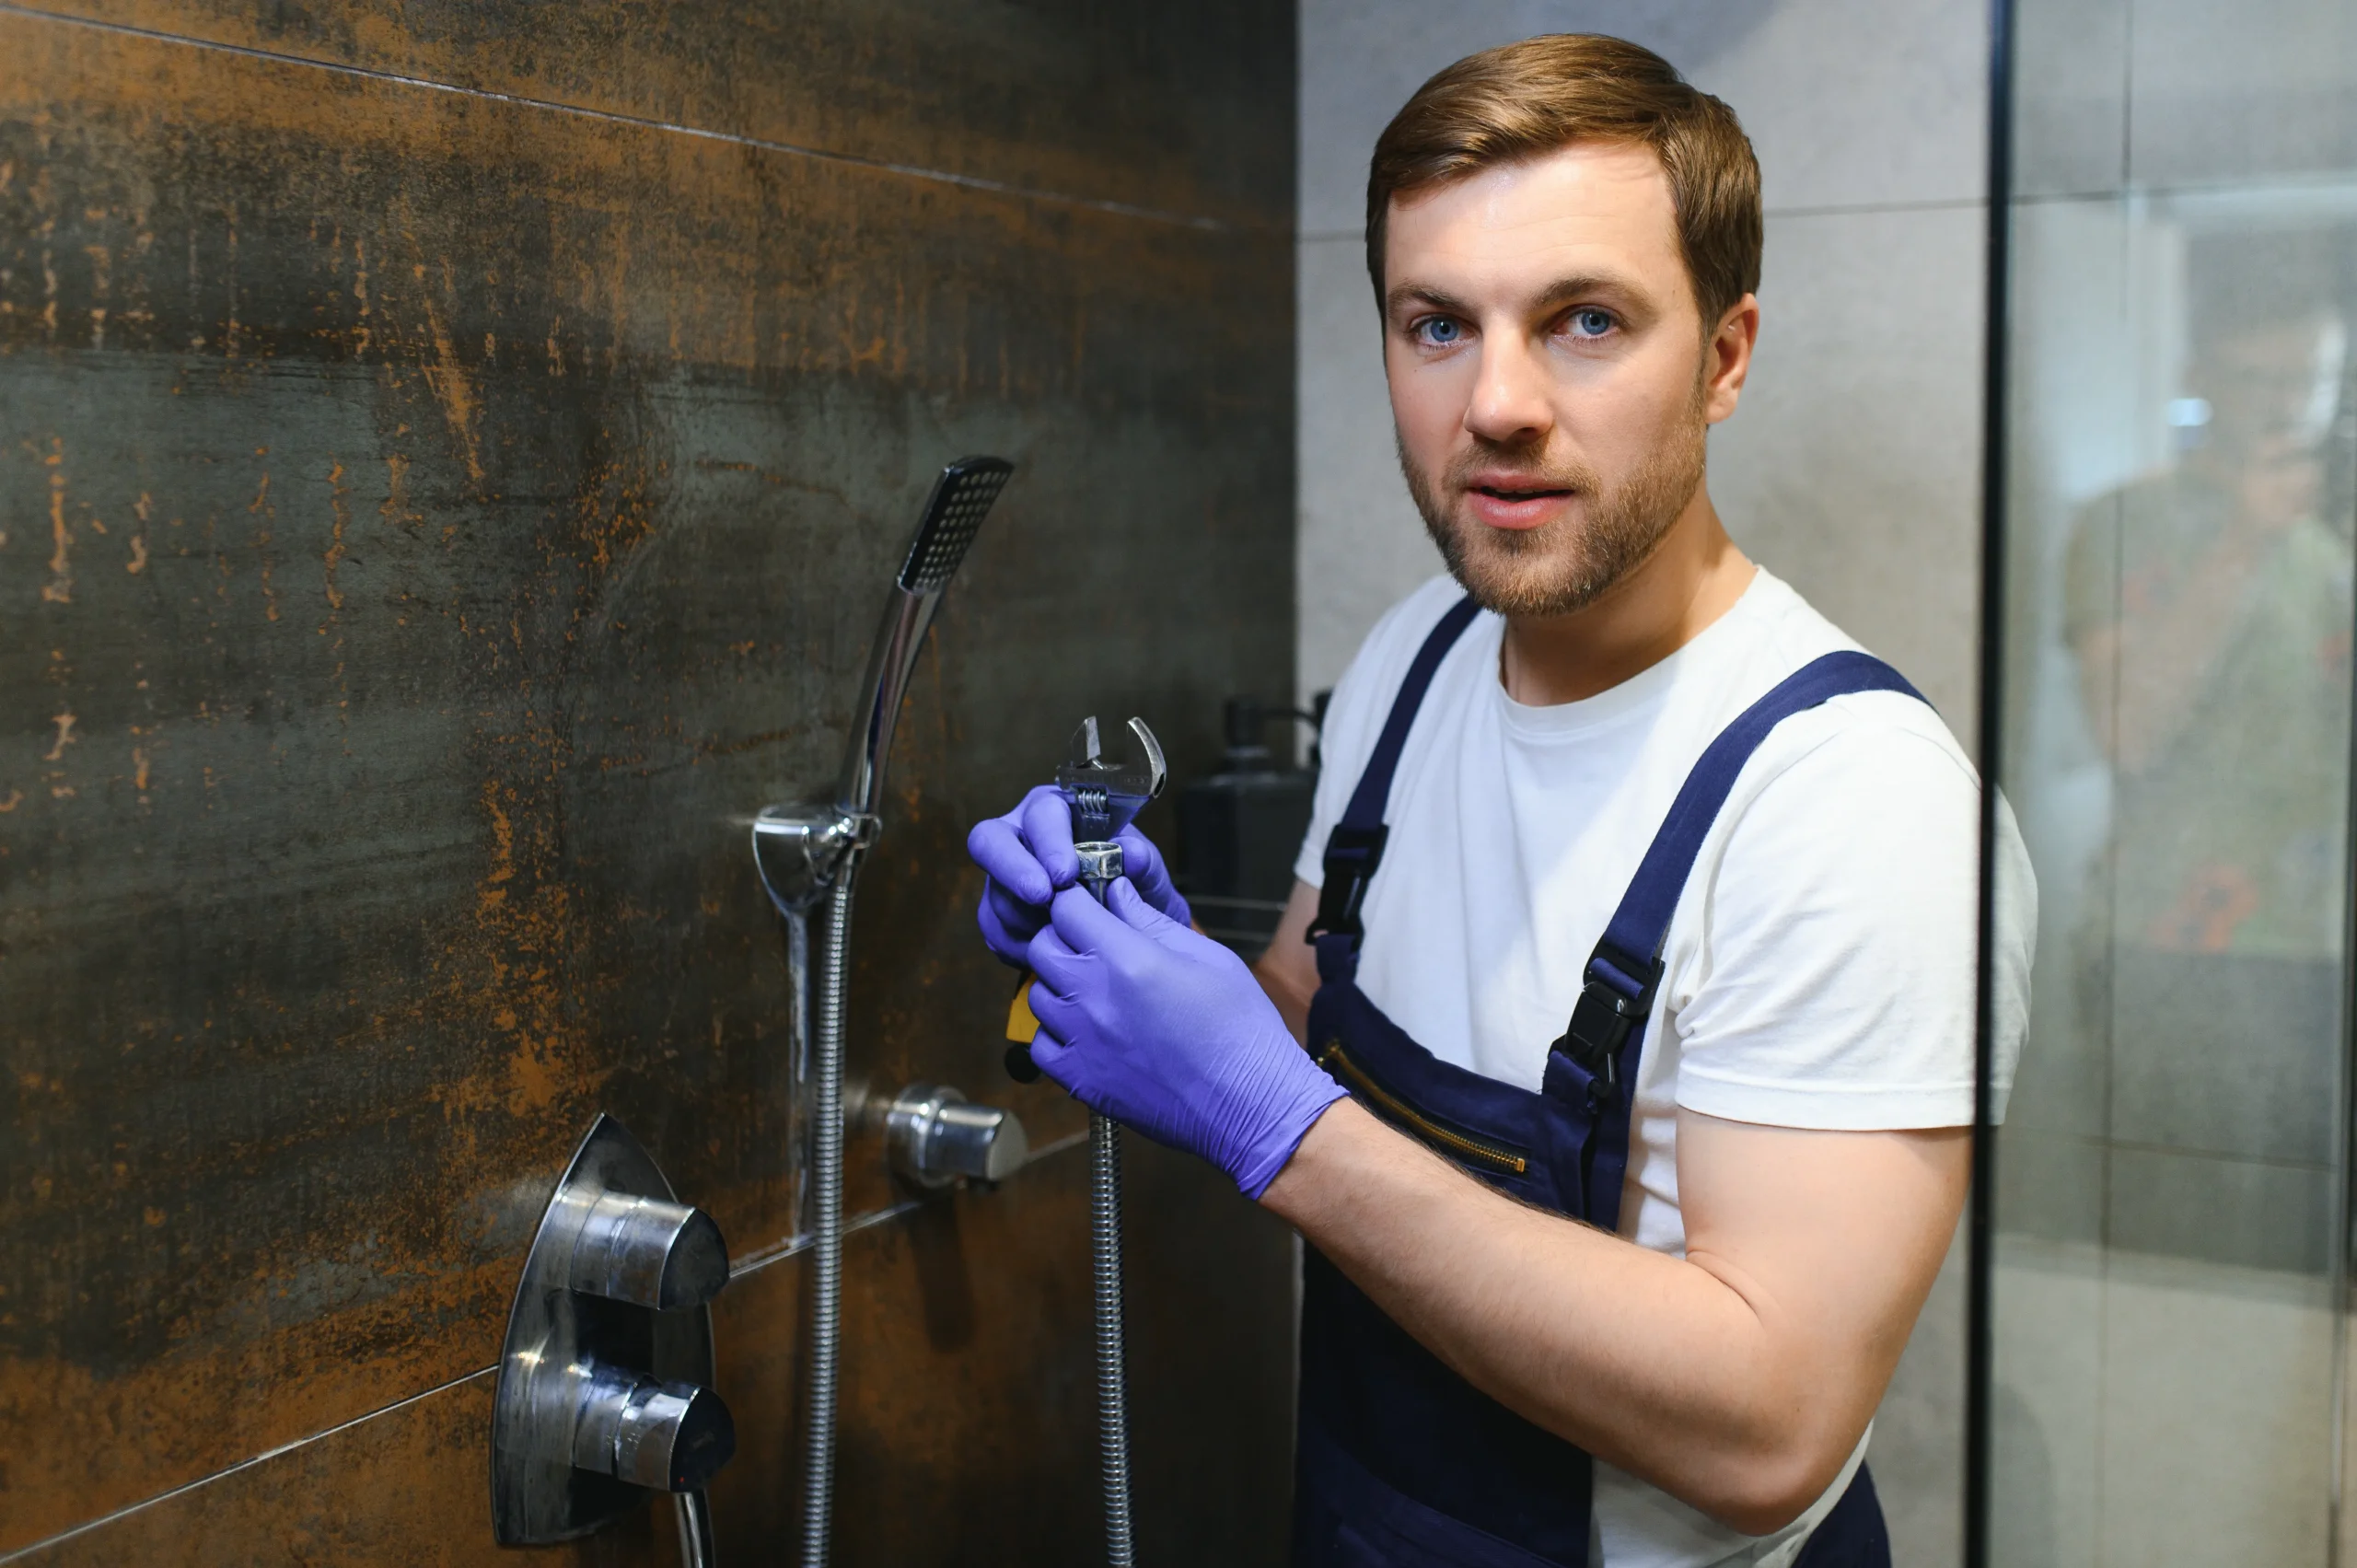 an image about A man in a blue shirt is cleaning a shower in one of the cities.